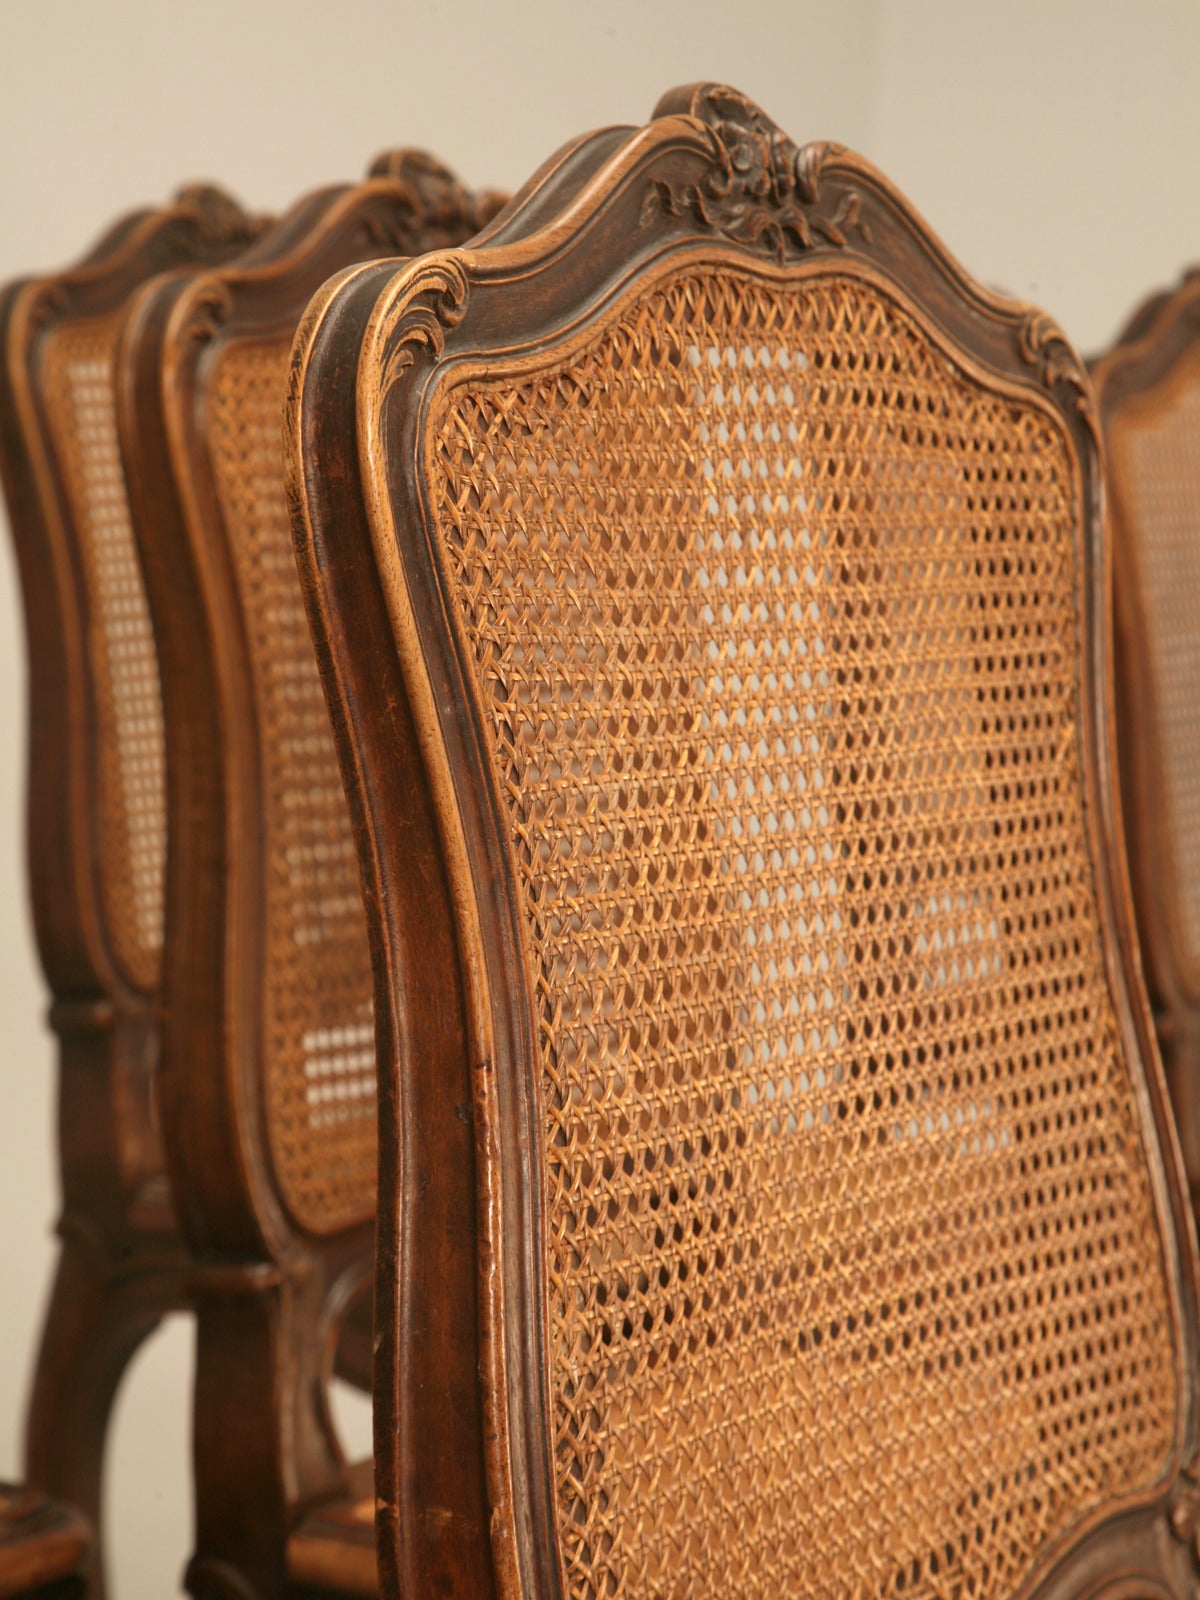 Circa 1880-1900 Set of twelve Louis XV style French walnut dining chairs in as found condition. We were all set to have the two chairs re-caned, and then someone asked us about upholstering the chairs and removing the cane. We would be happy to run